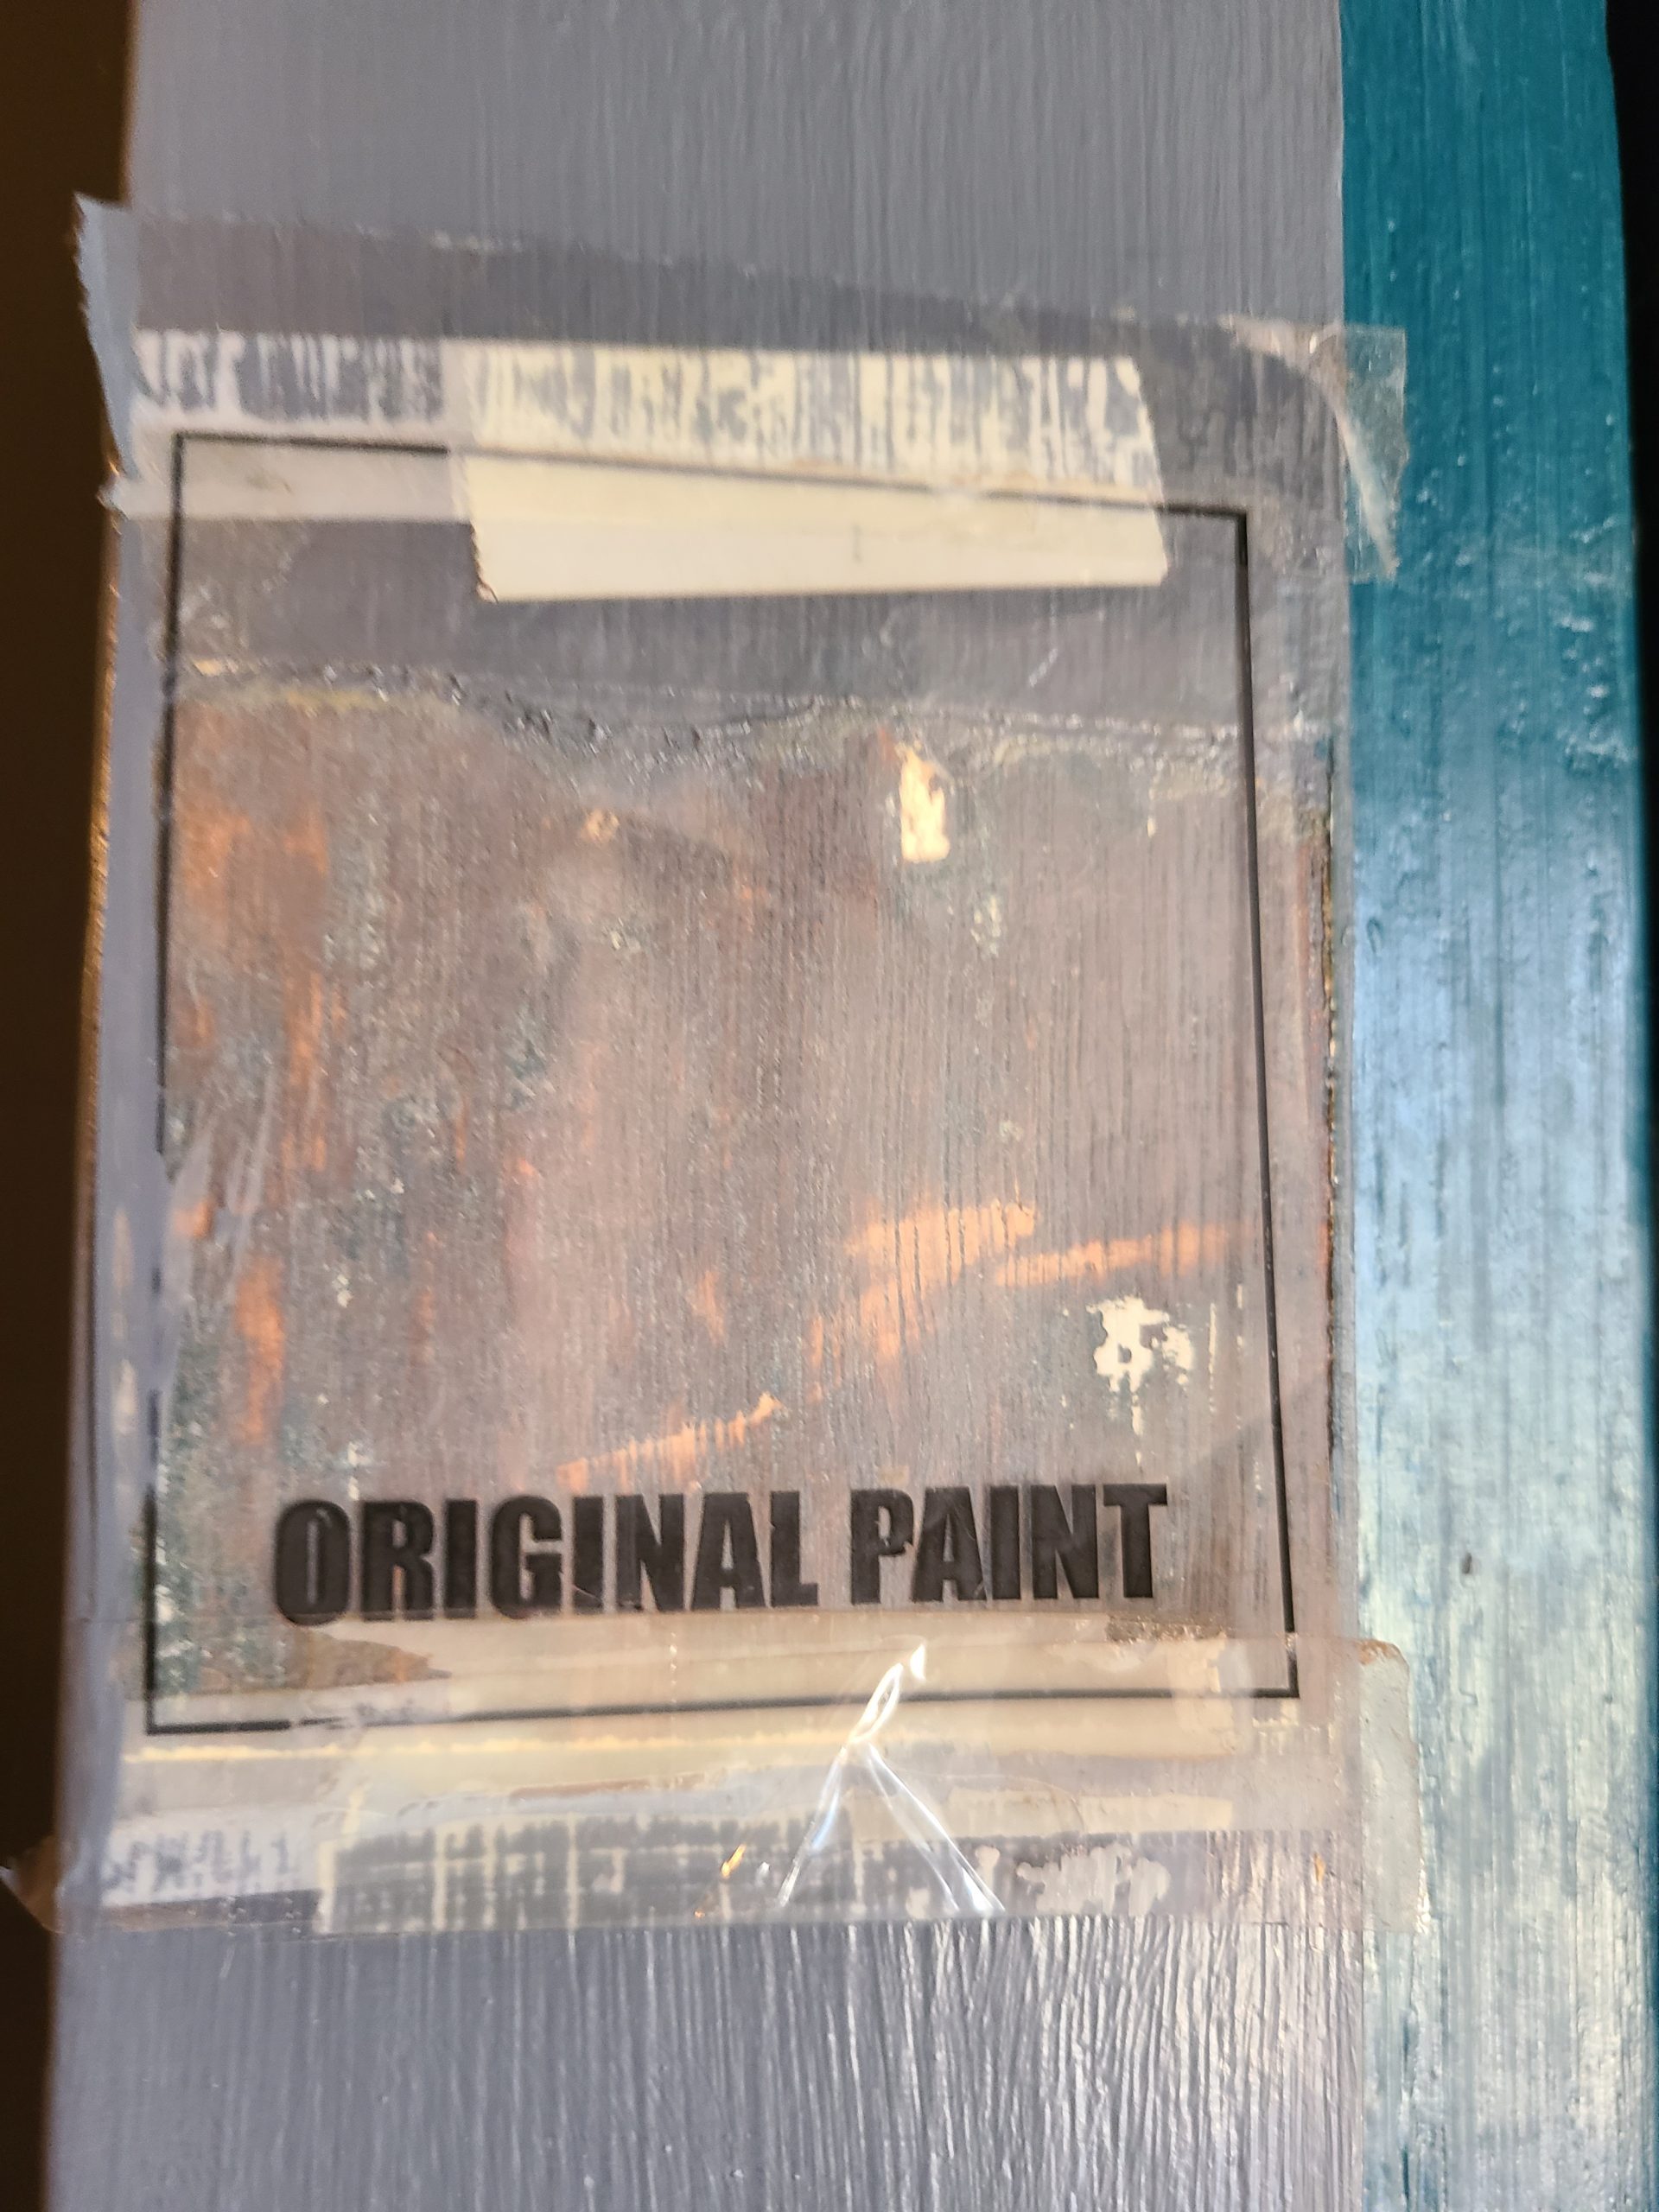 Original paint at the DeWint House.